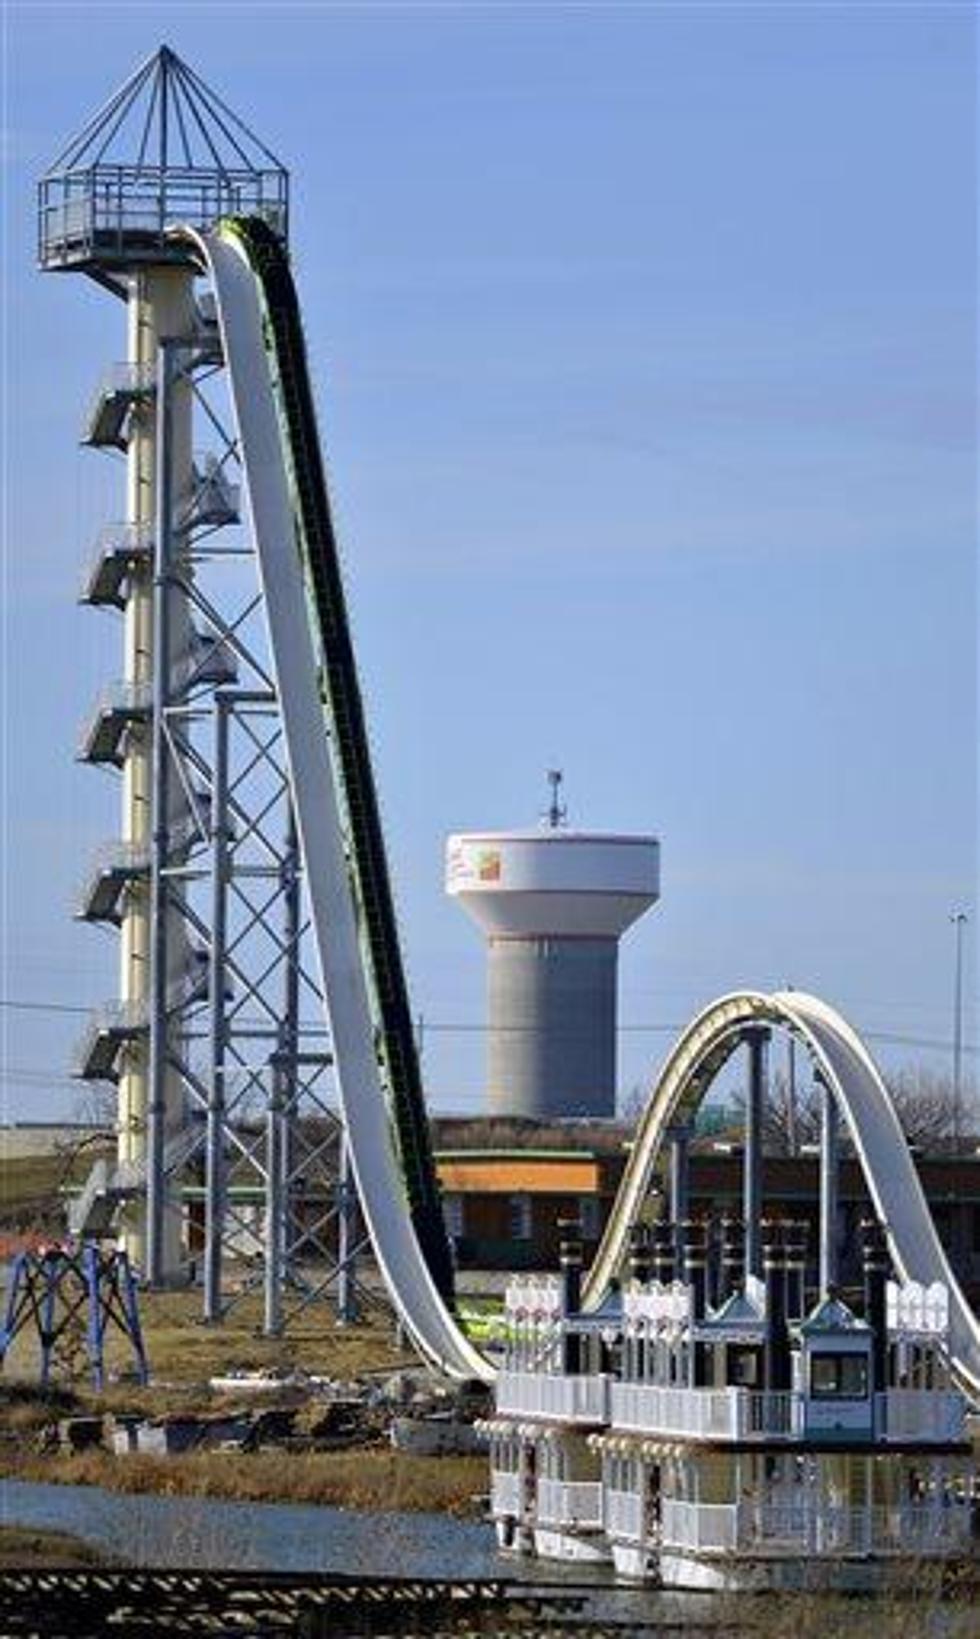 Where is the world's tallest water slide?